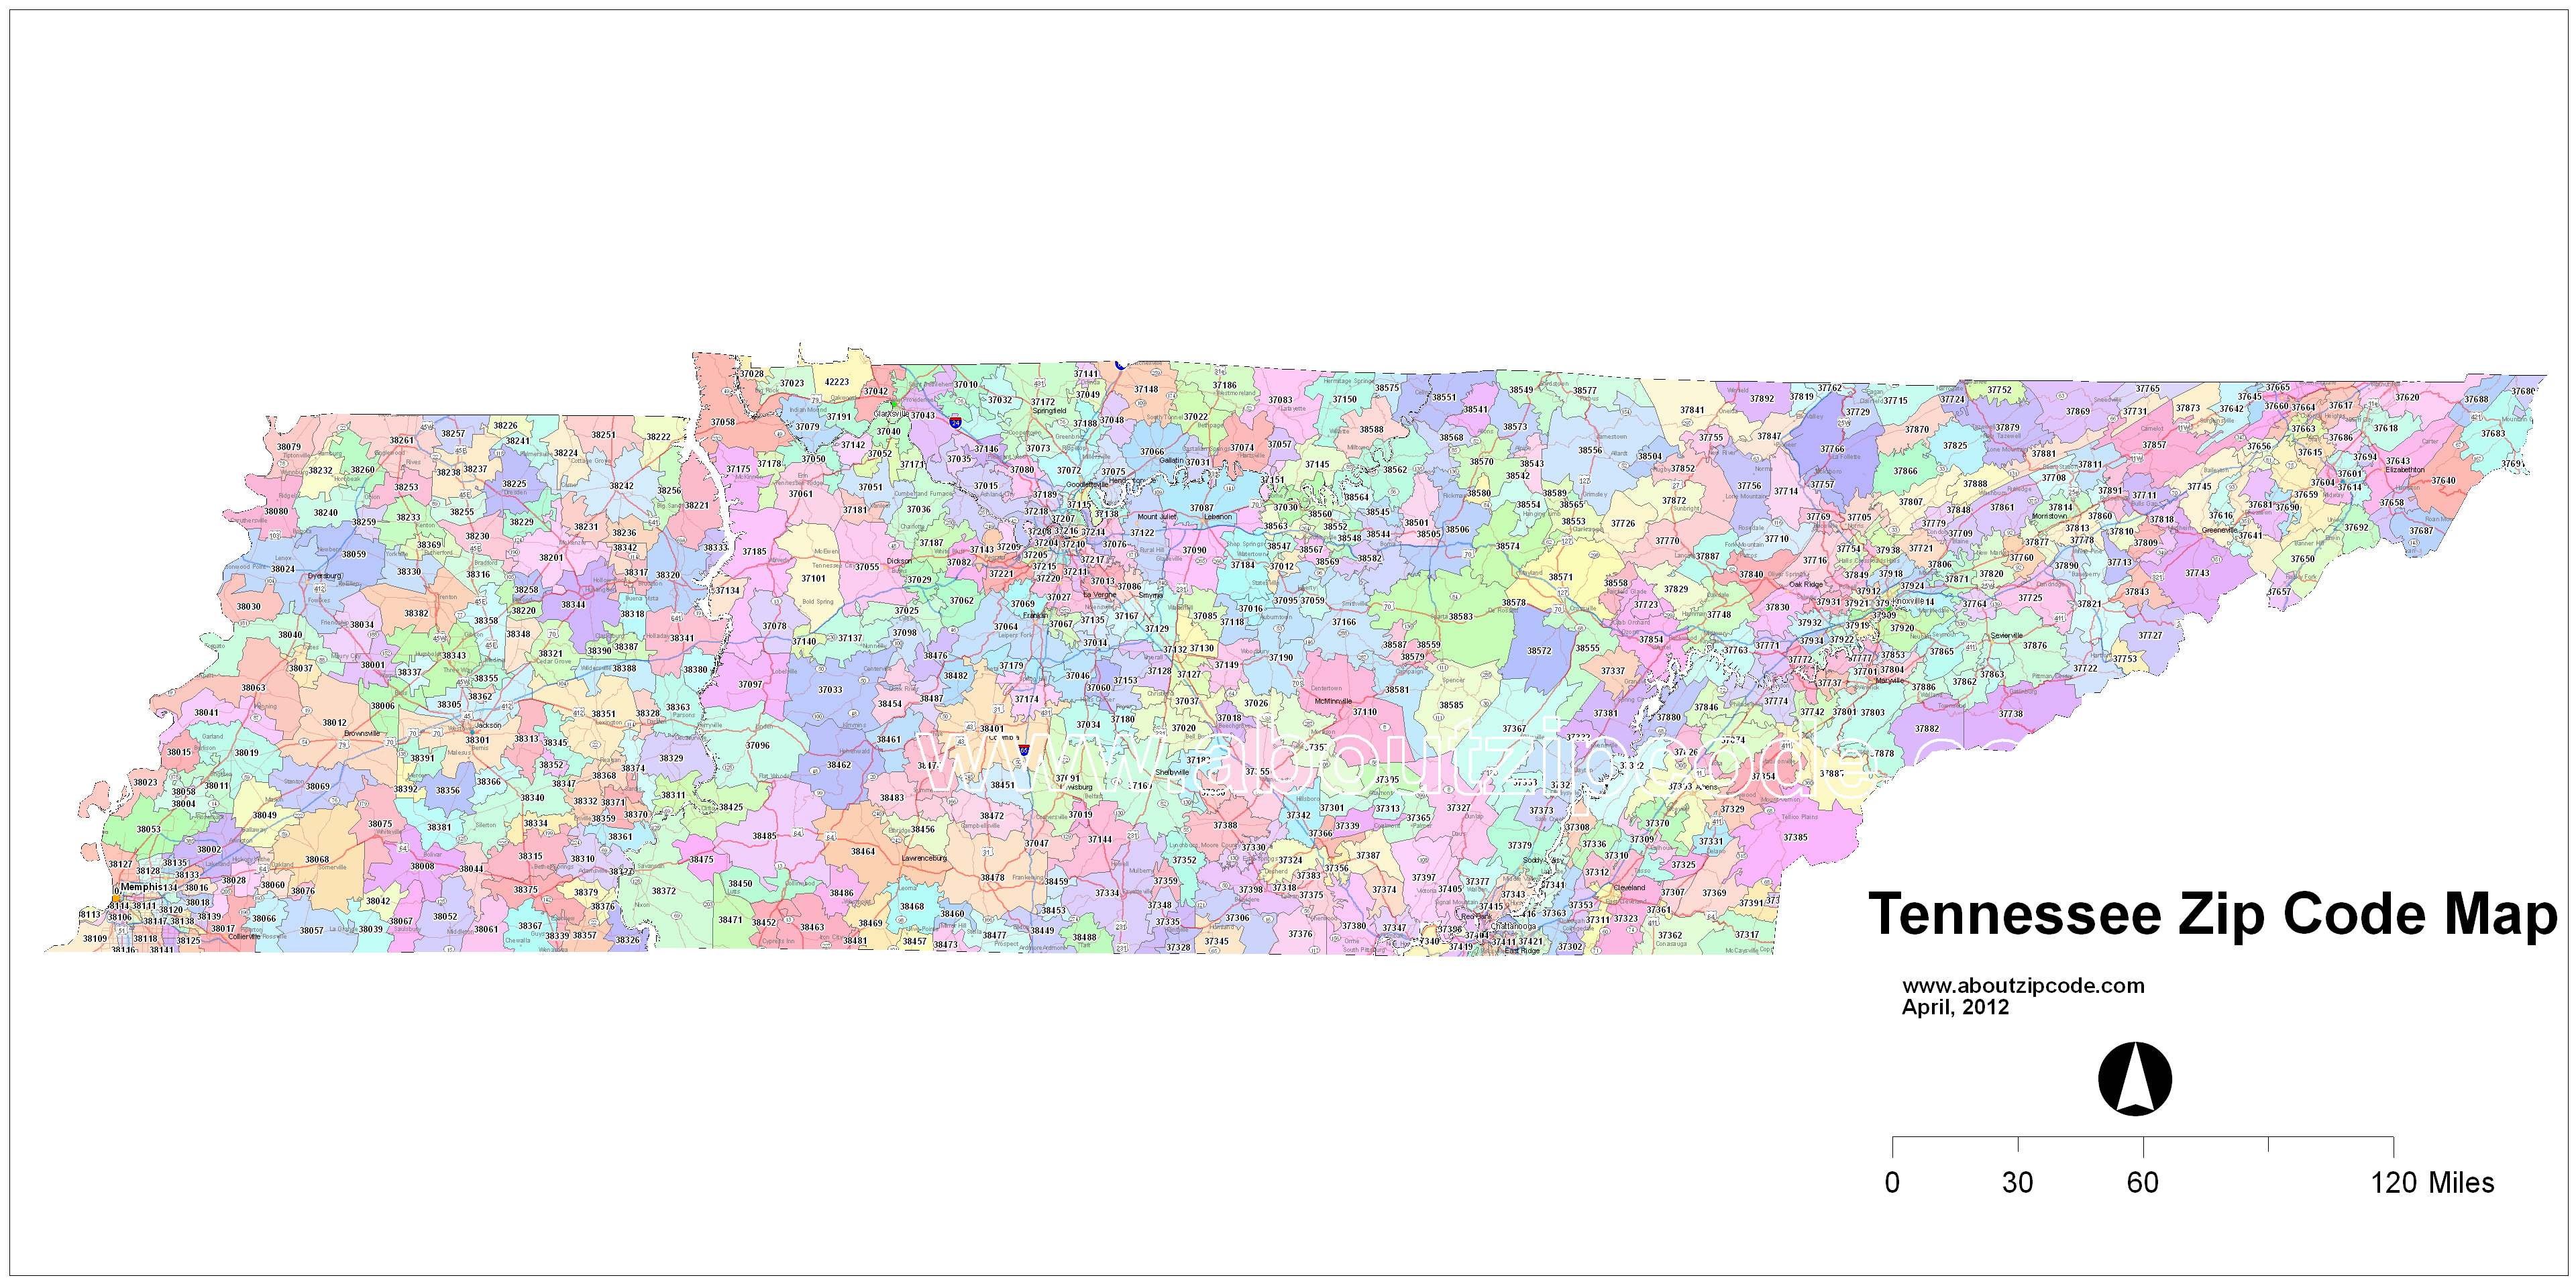 Tennessee Zip Code Maps Free Tennessee Zip Code Maps